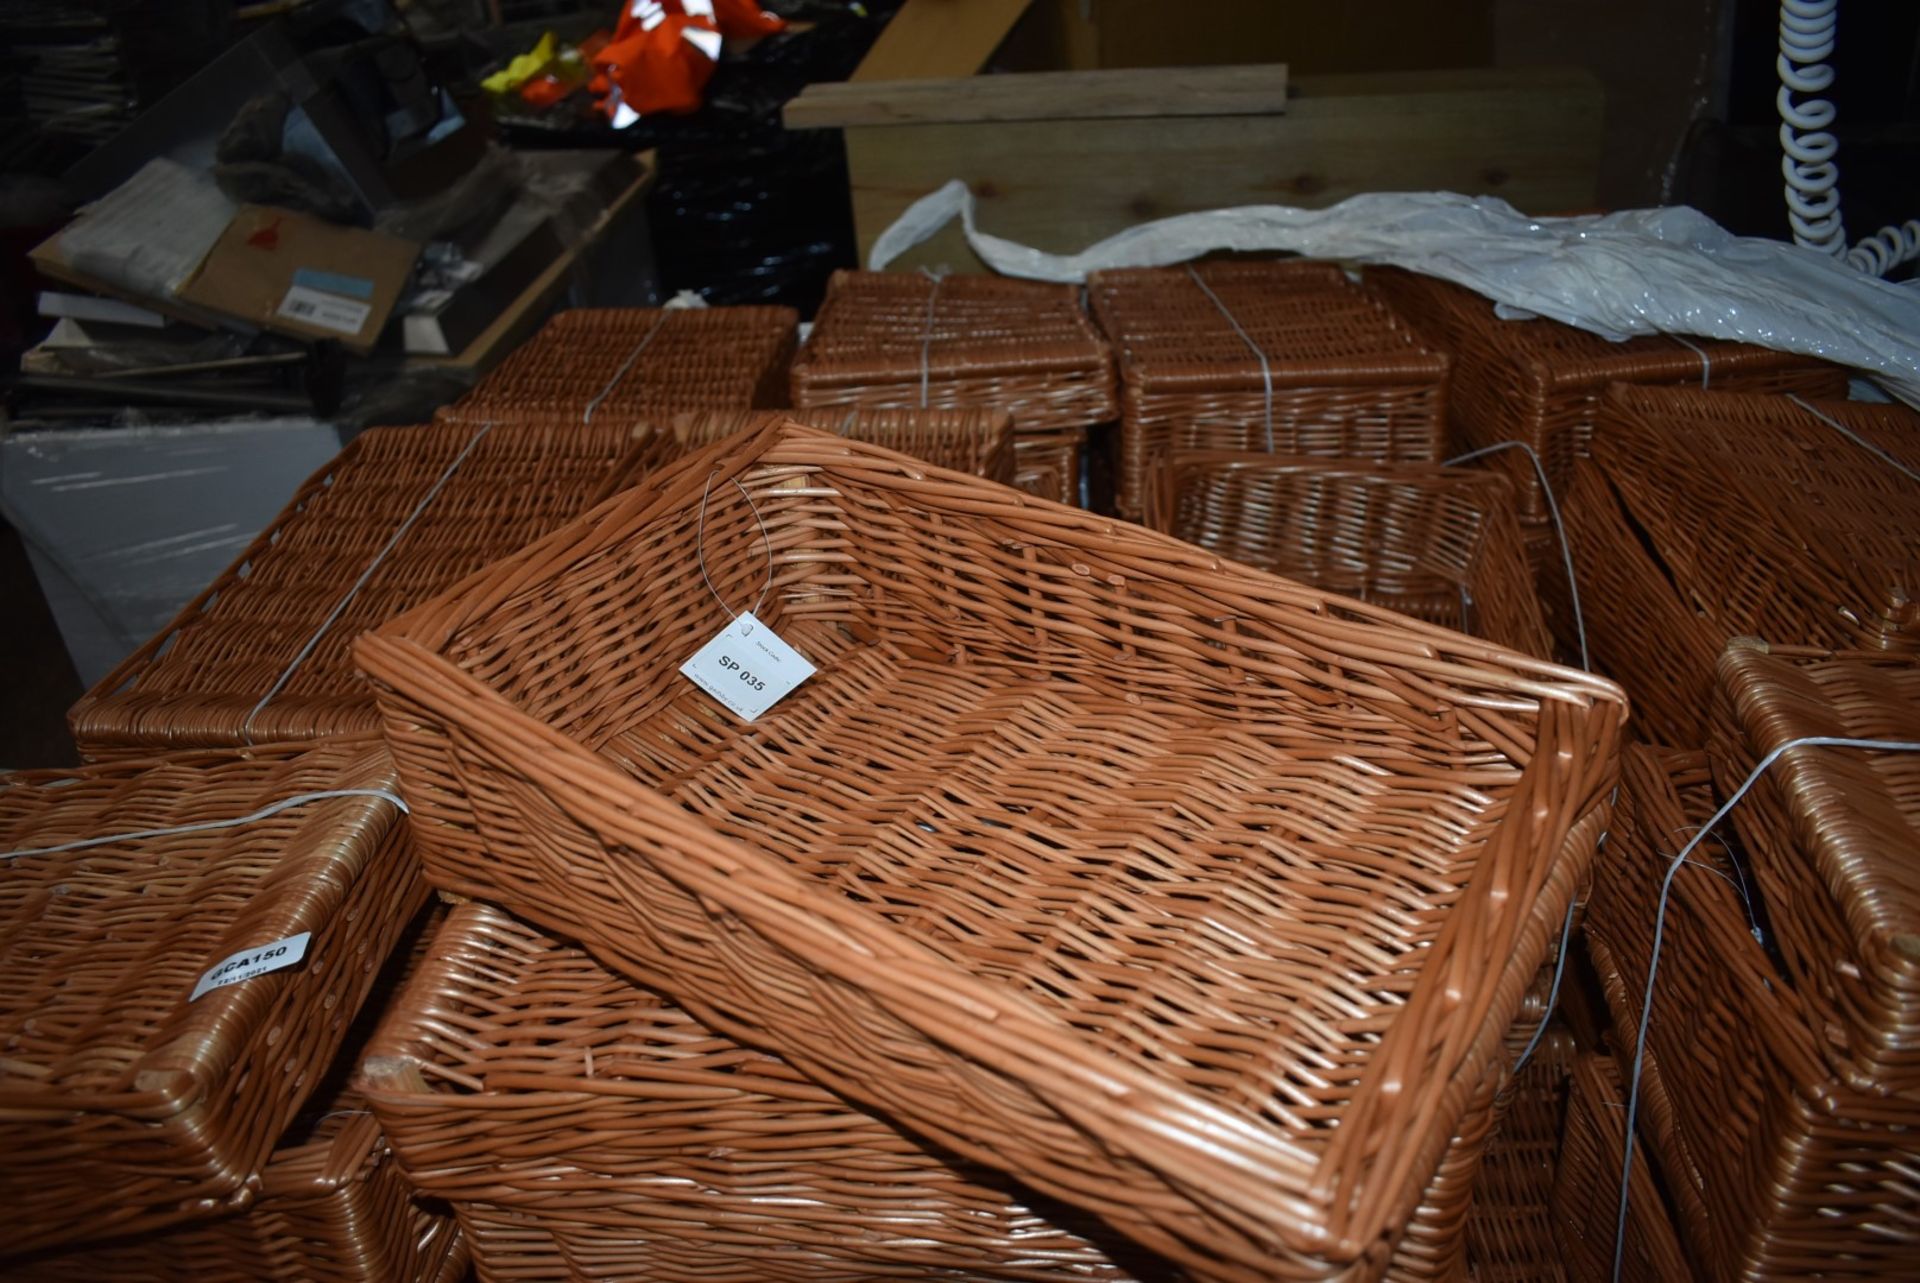 8 x Hand Woven Retail Display Sloping Wicker Baskets - Ideal For Presentation in Wide Range of - Image 6 of 10